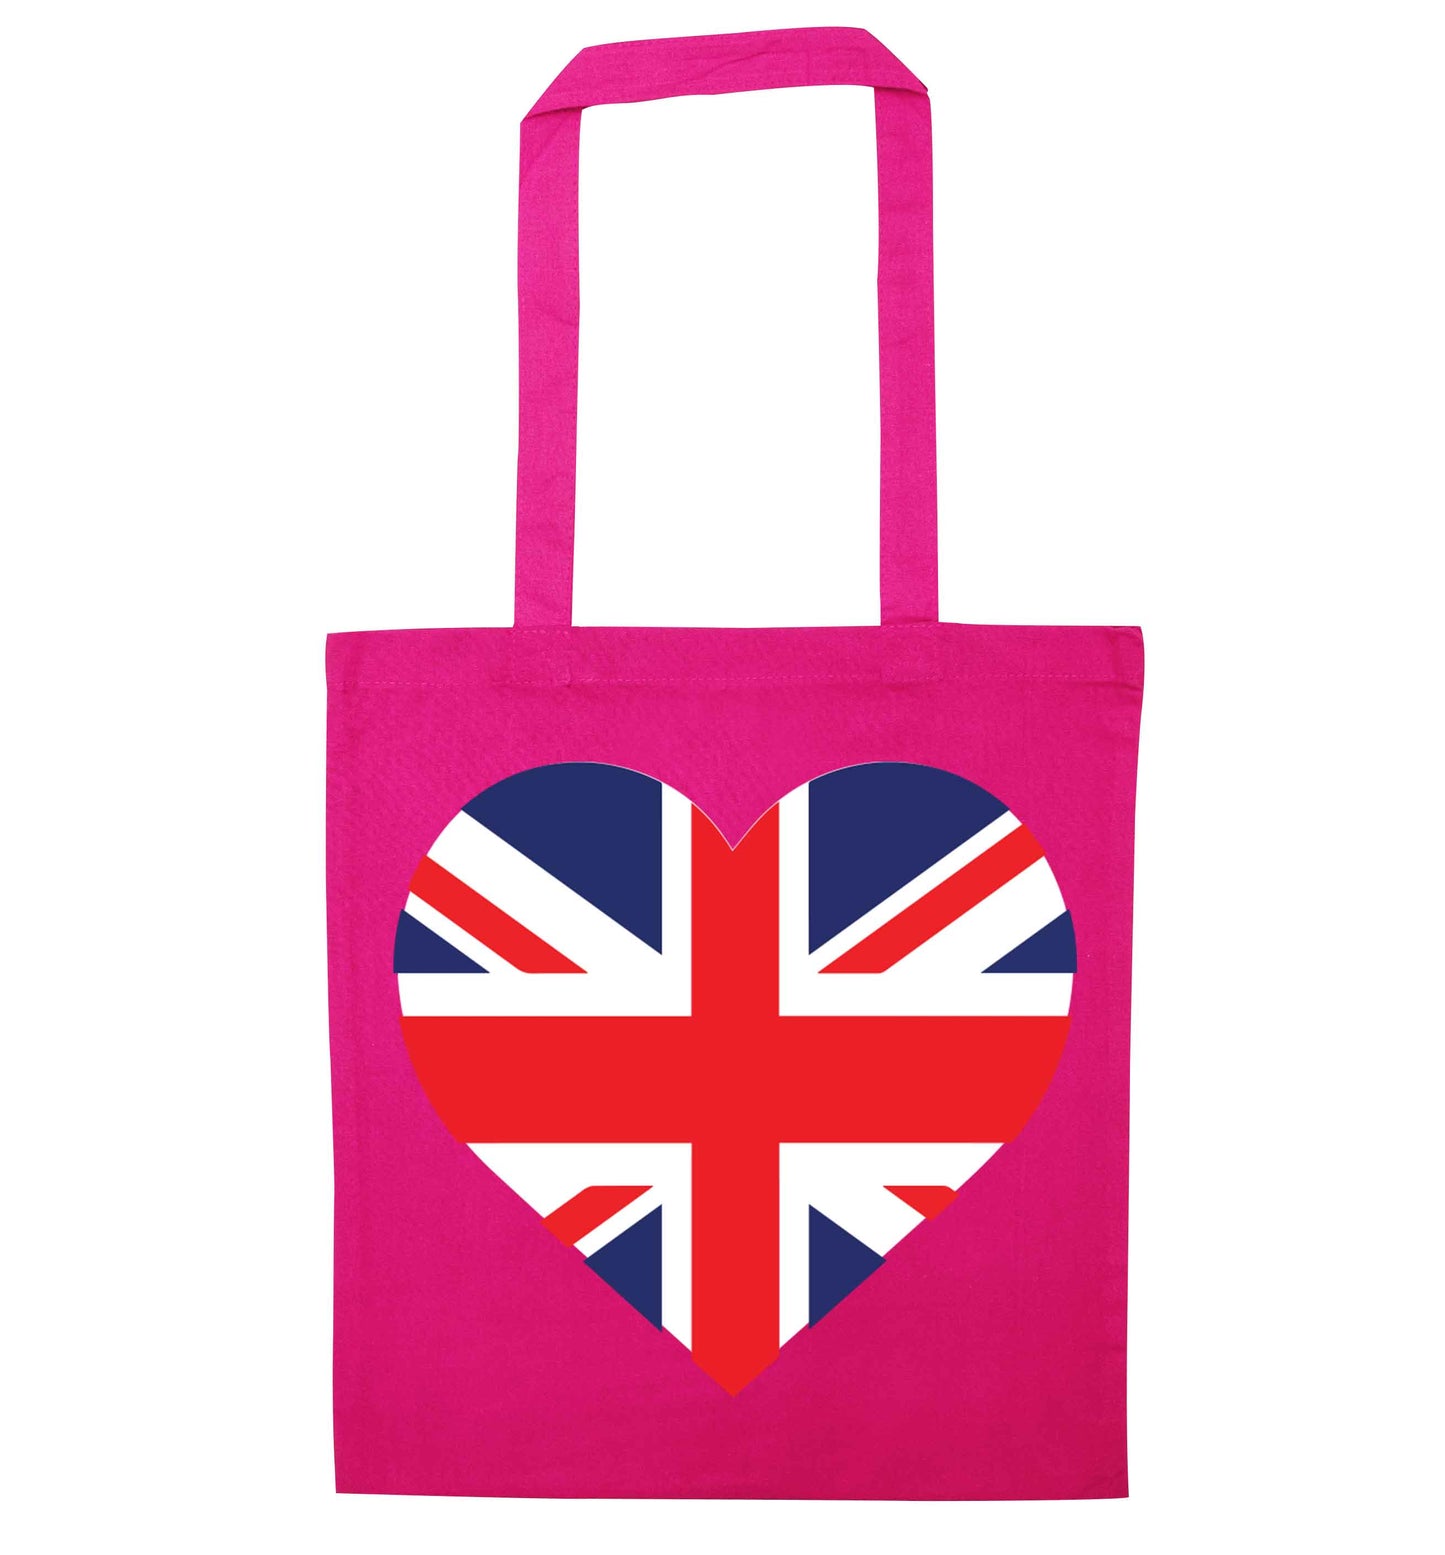 Union Jack Heart pink tote bag